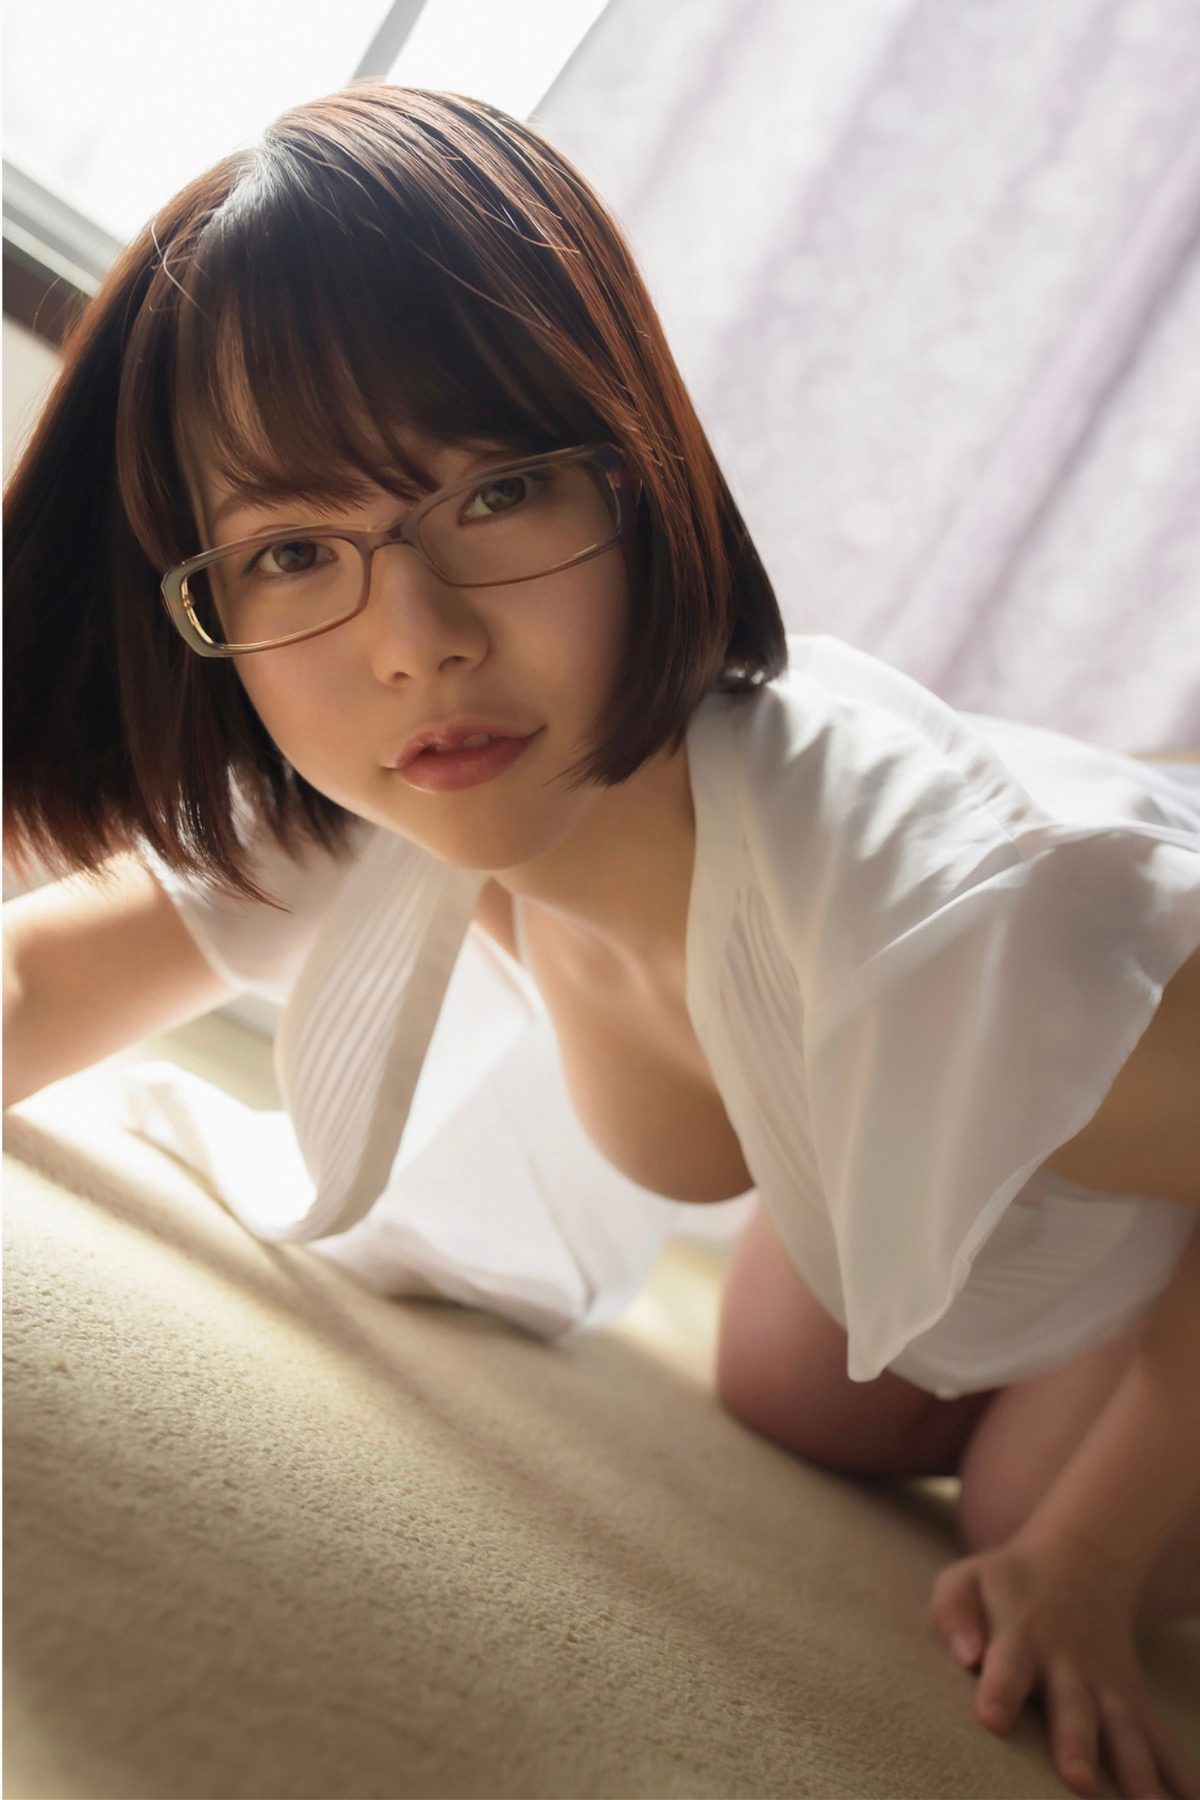 Gravure Photo Book Nenne 初愛ねんね Eye Difference 0039 2397160141.jpg